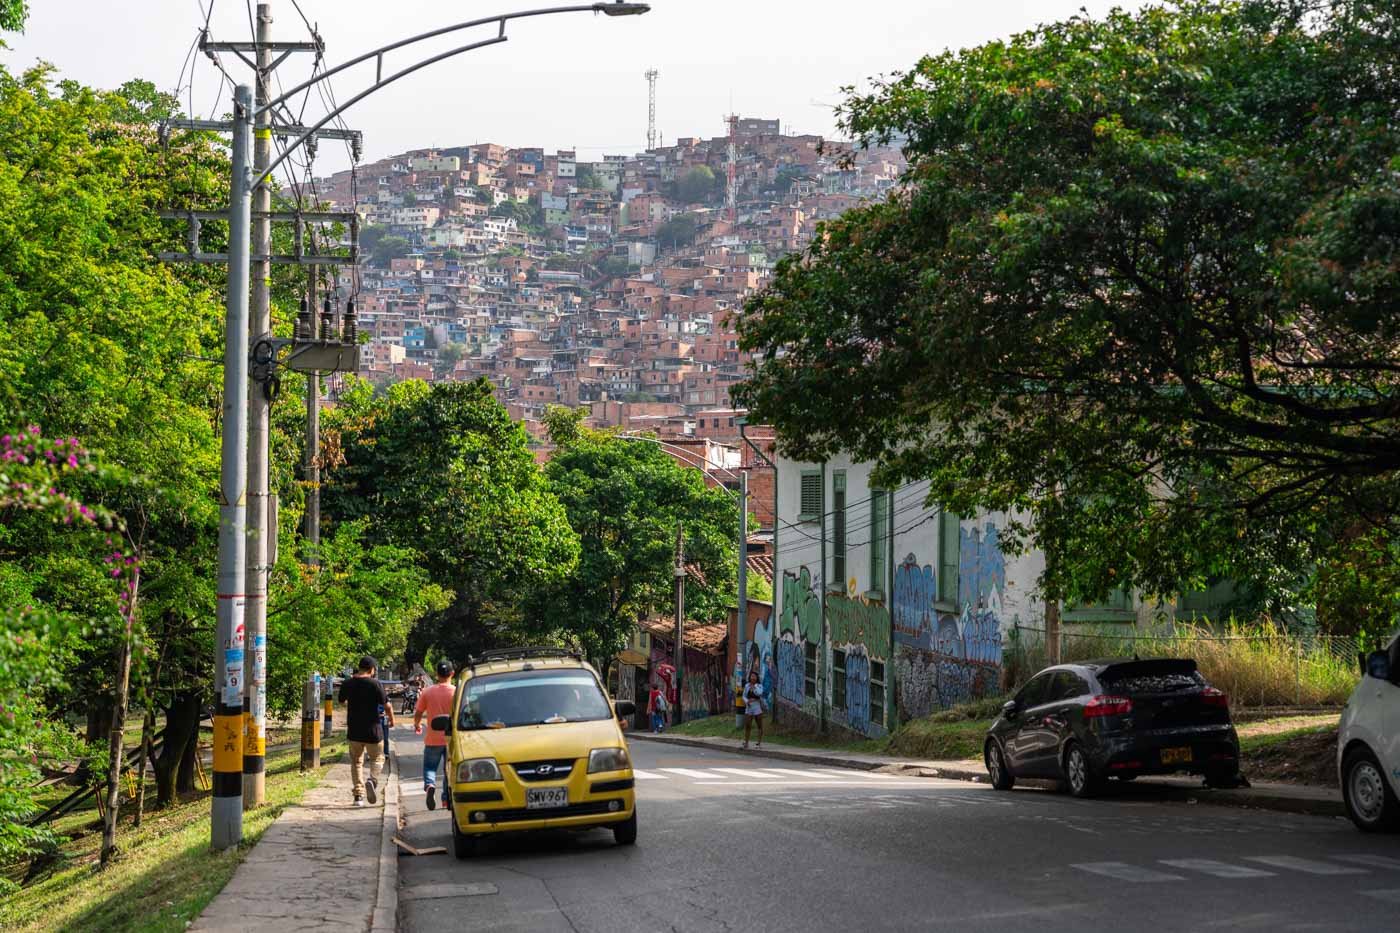 A tree-lined street with a view of the Comuna 13 favelas in the distance.